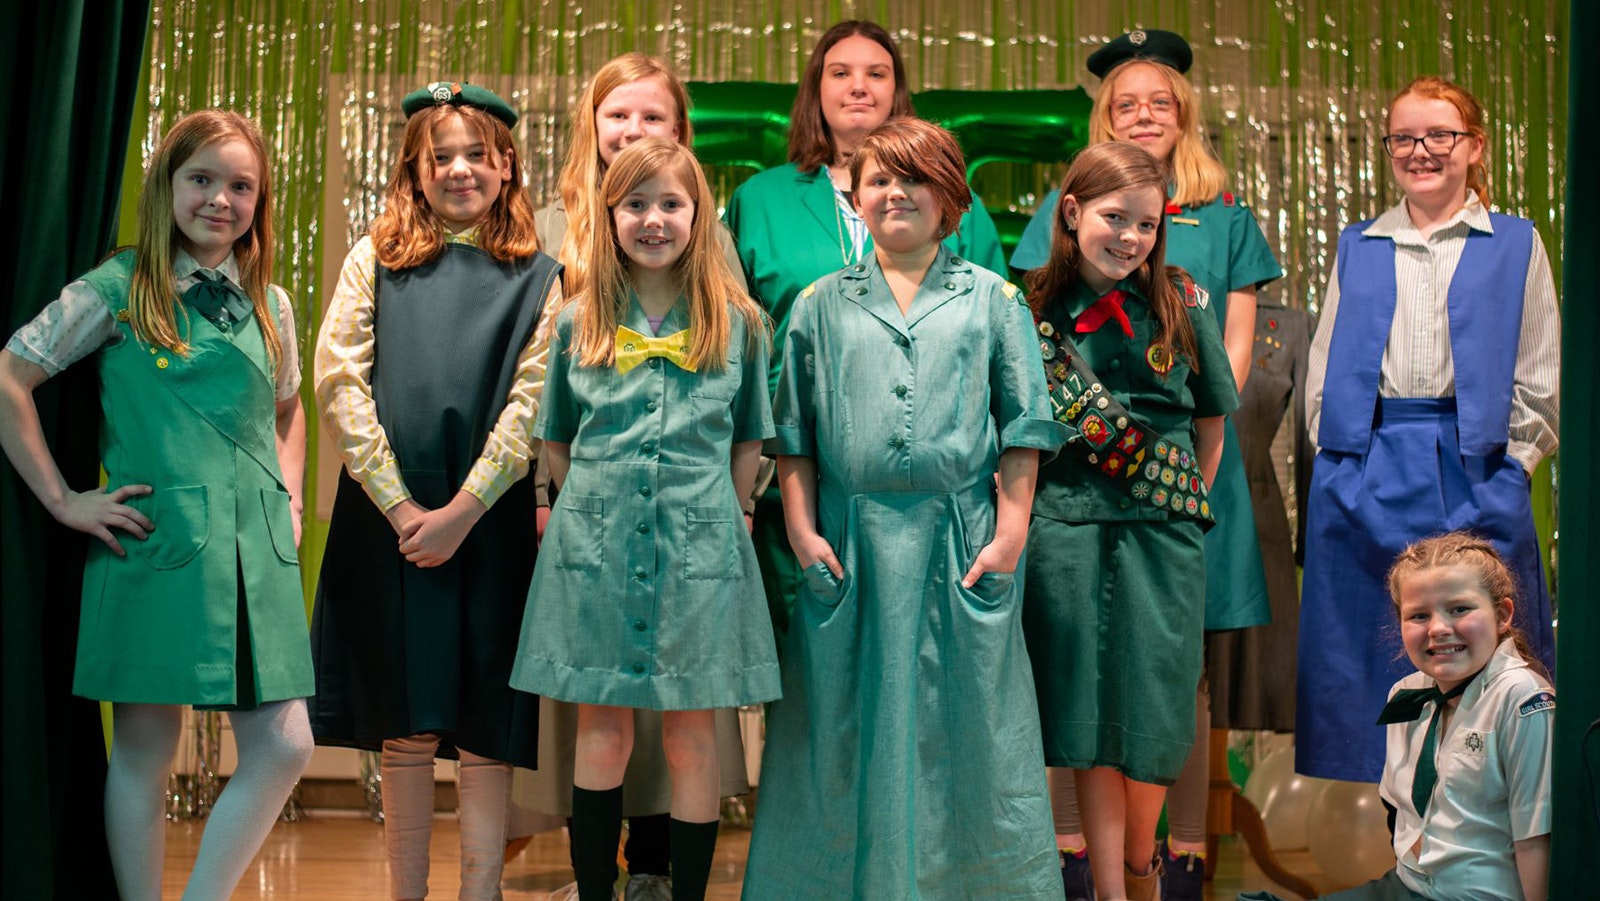 Members of the Cody Girl Scouts dressed in uniforms throughout the years as part of the fashion show during the event.